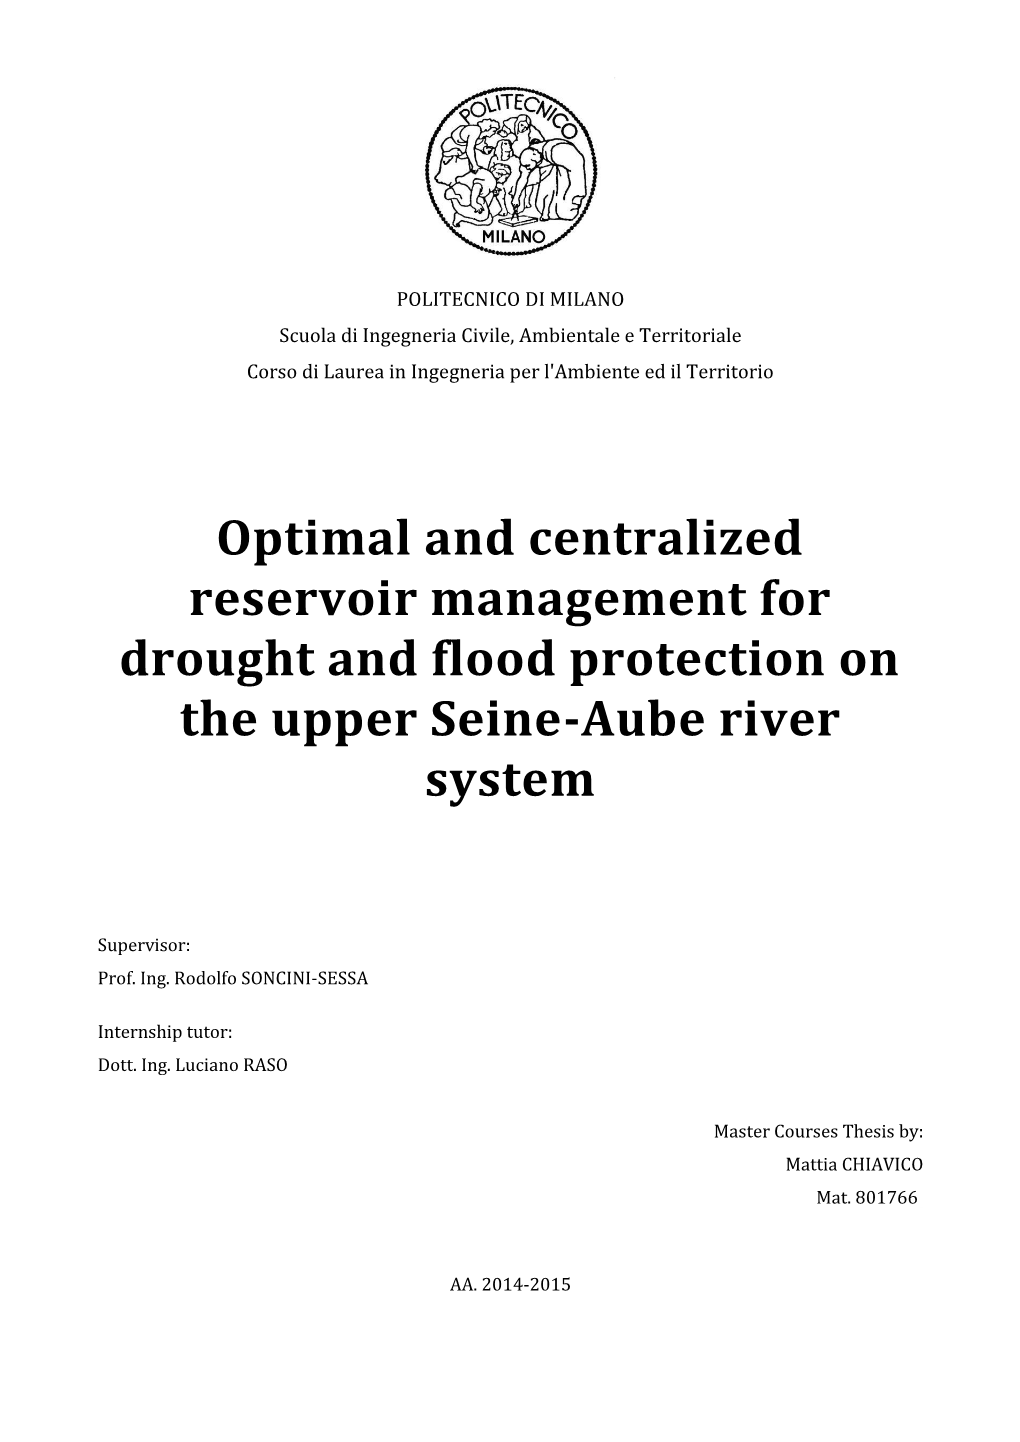 Optimal and Centralized Reservoir Management for Drought and Flood Protection on the Upper Seine-Aube River System